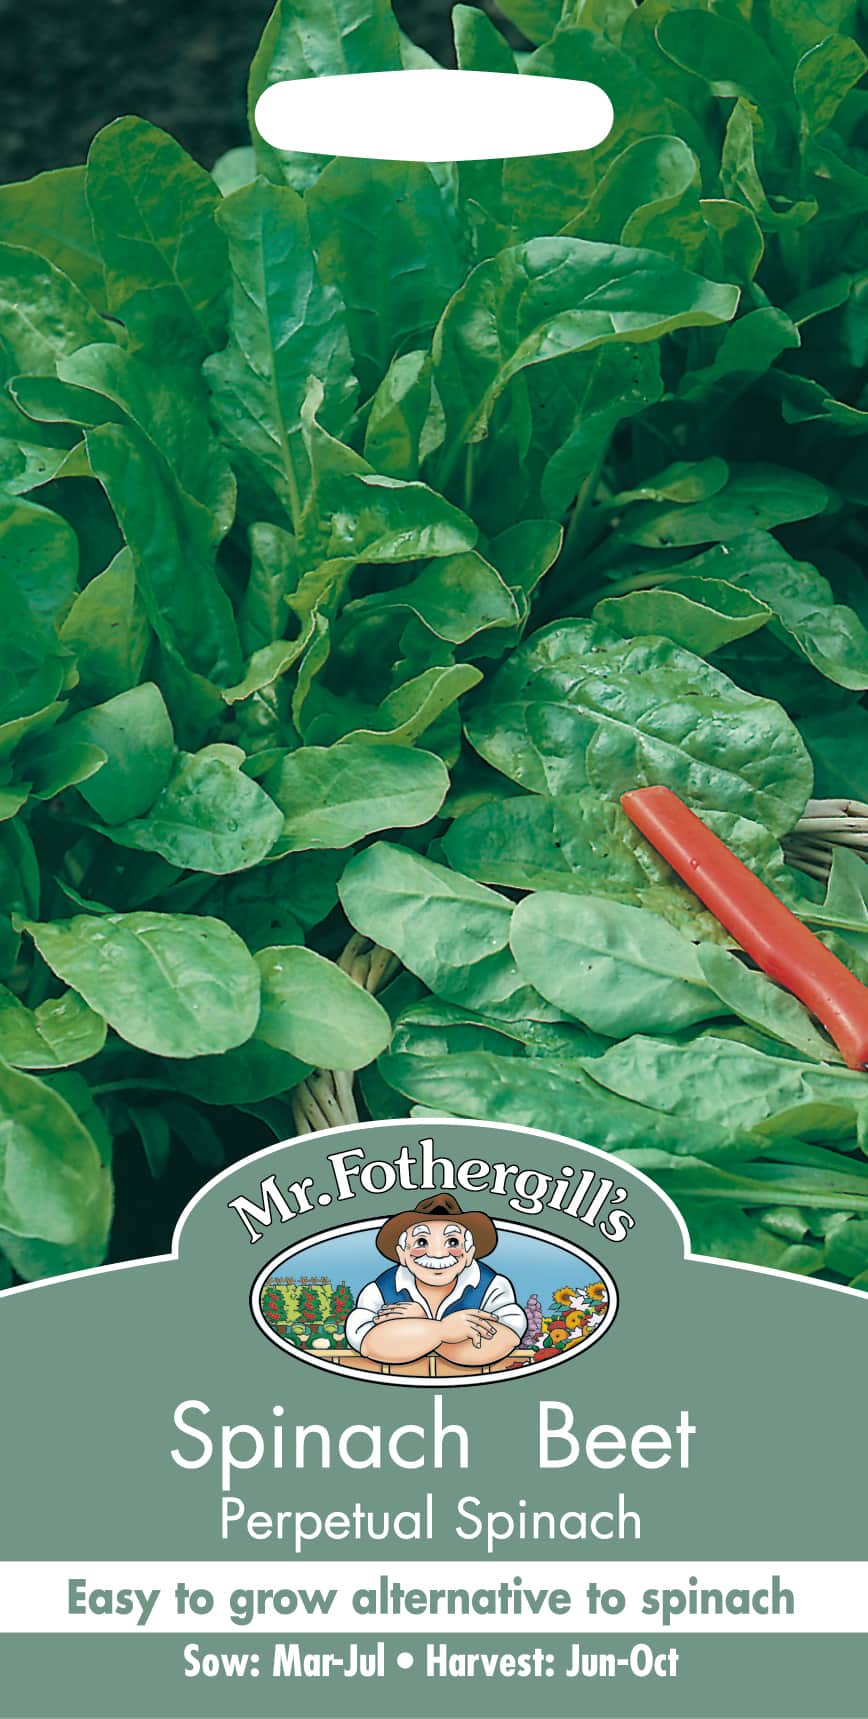 mangold-perpetual-spinach-1